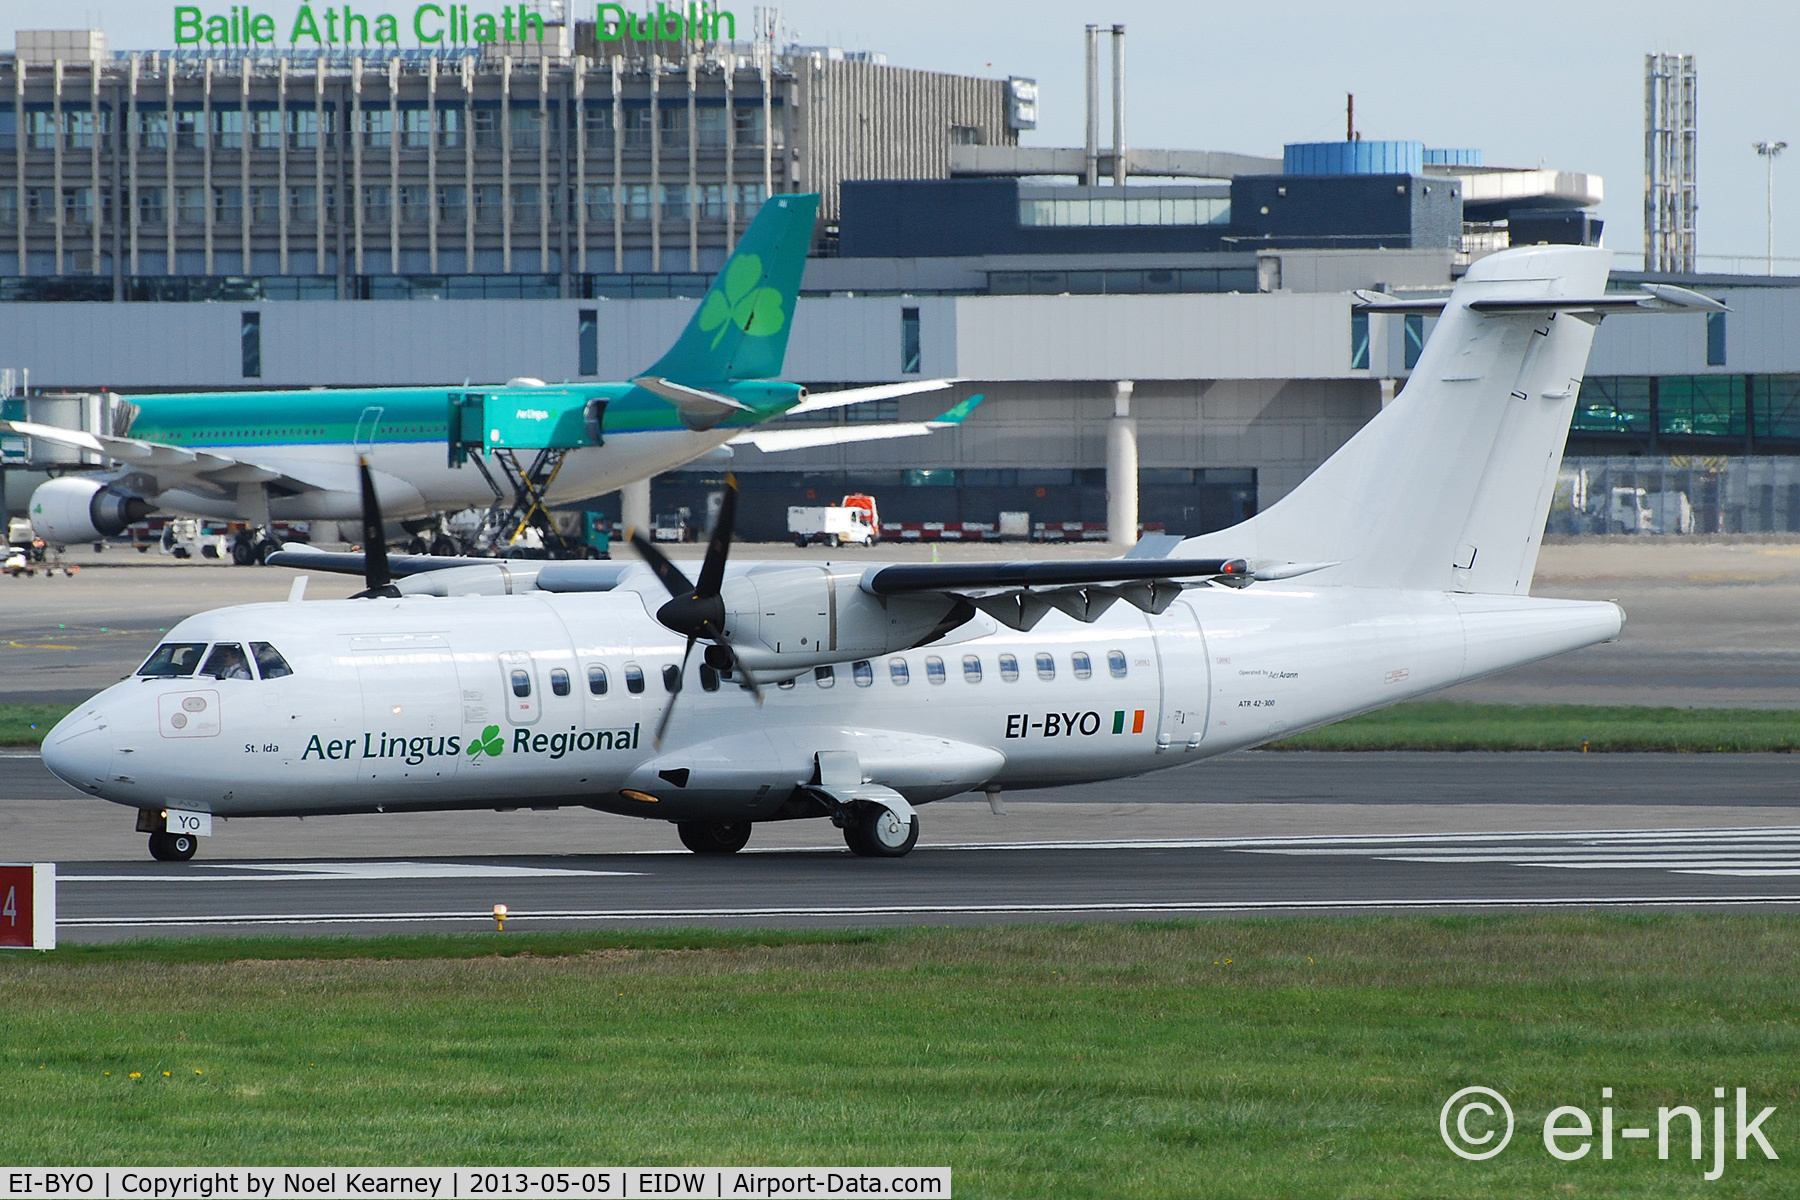 EI-BYO, 1989 ATR 42-300 C/N 161, Lined up for departure off Rwy 28 at Dublin.